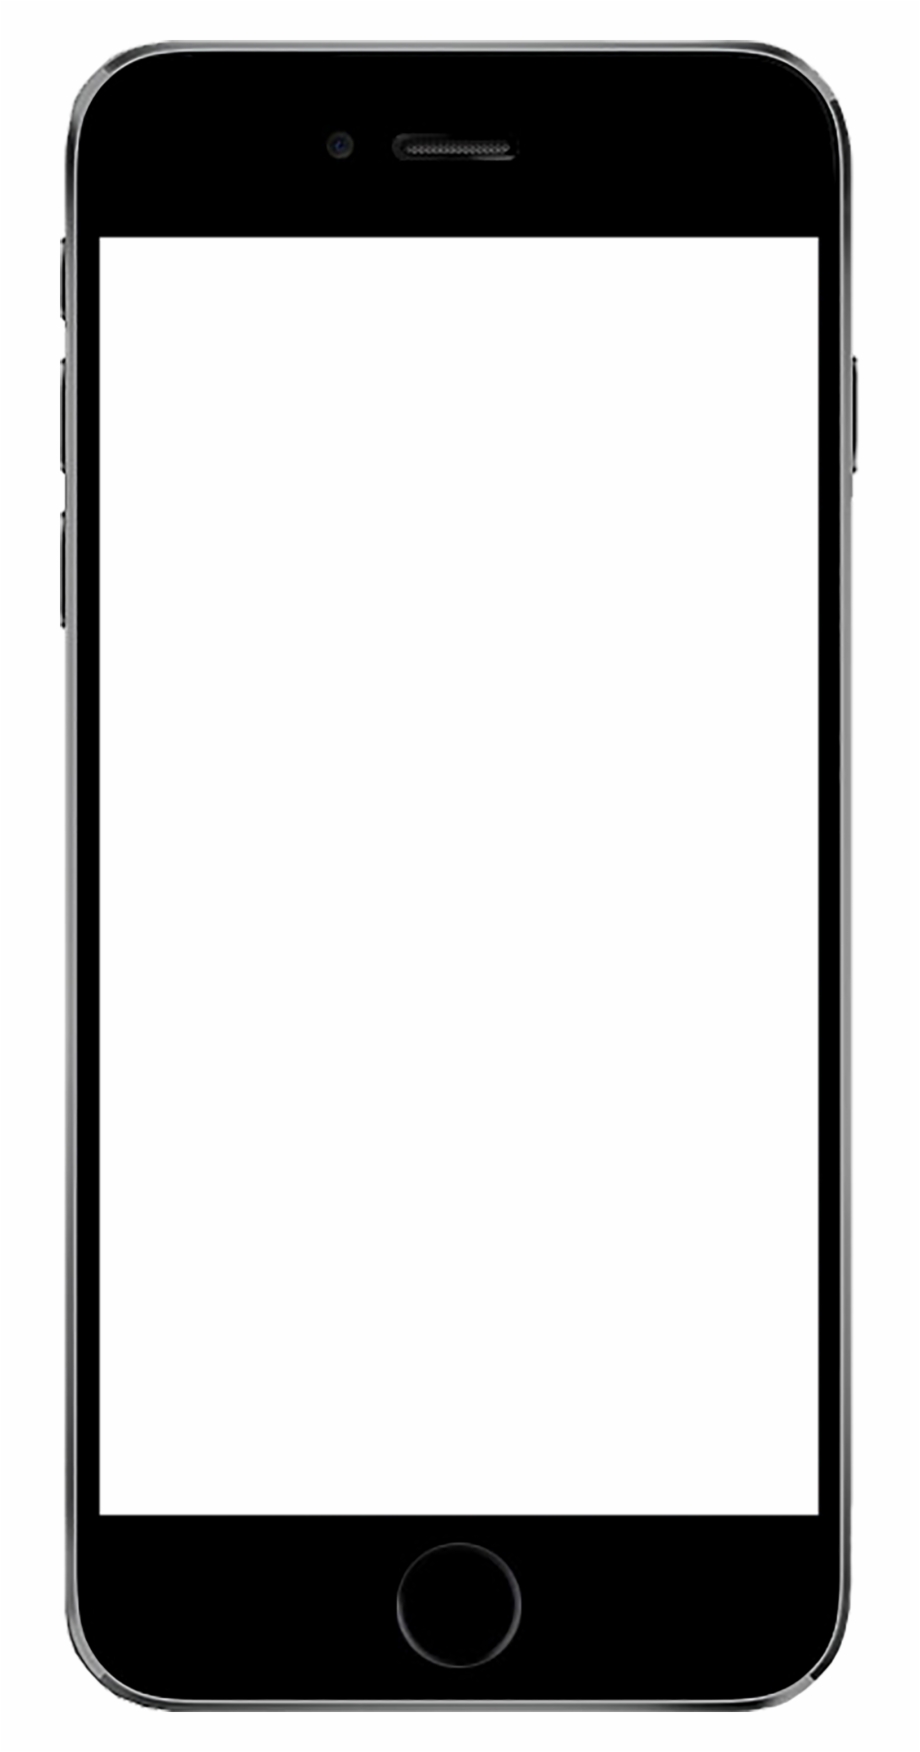 White Iphone 4 Png.